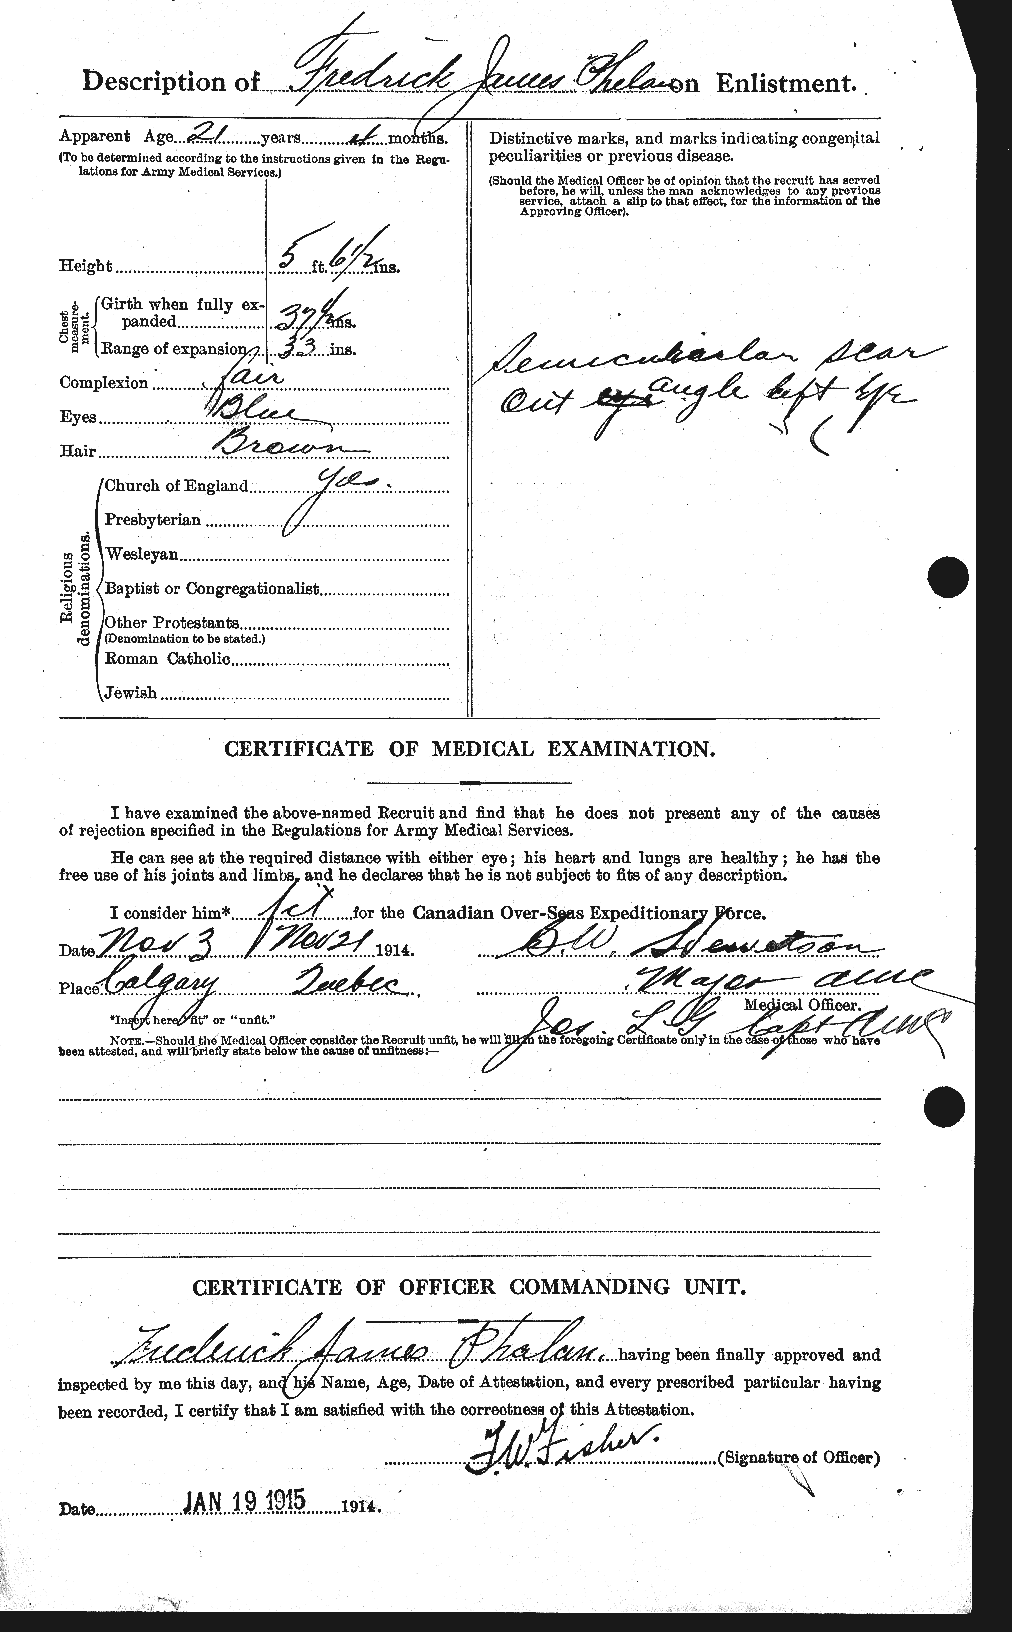 Personnel Records of the First World War - CEF 576840b